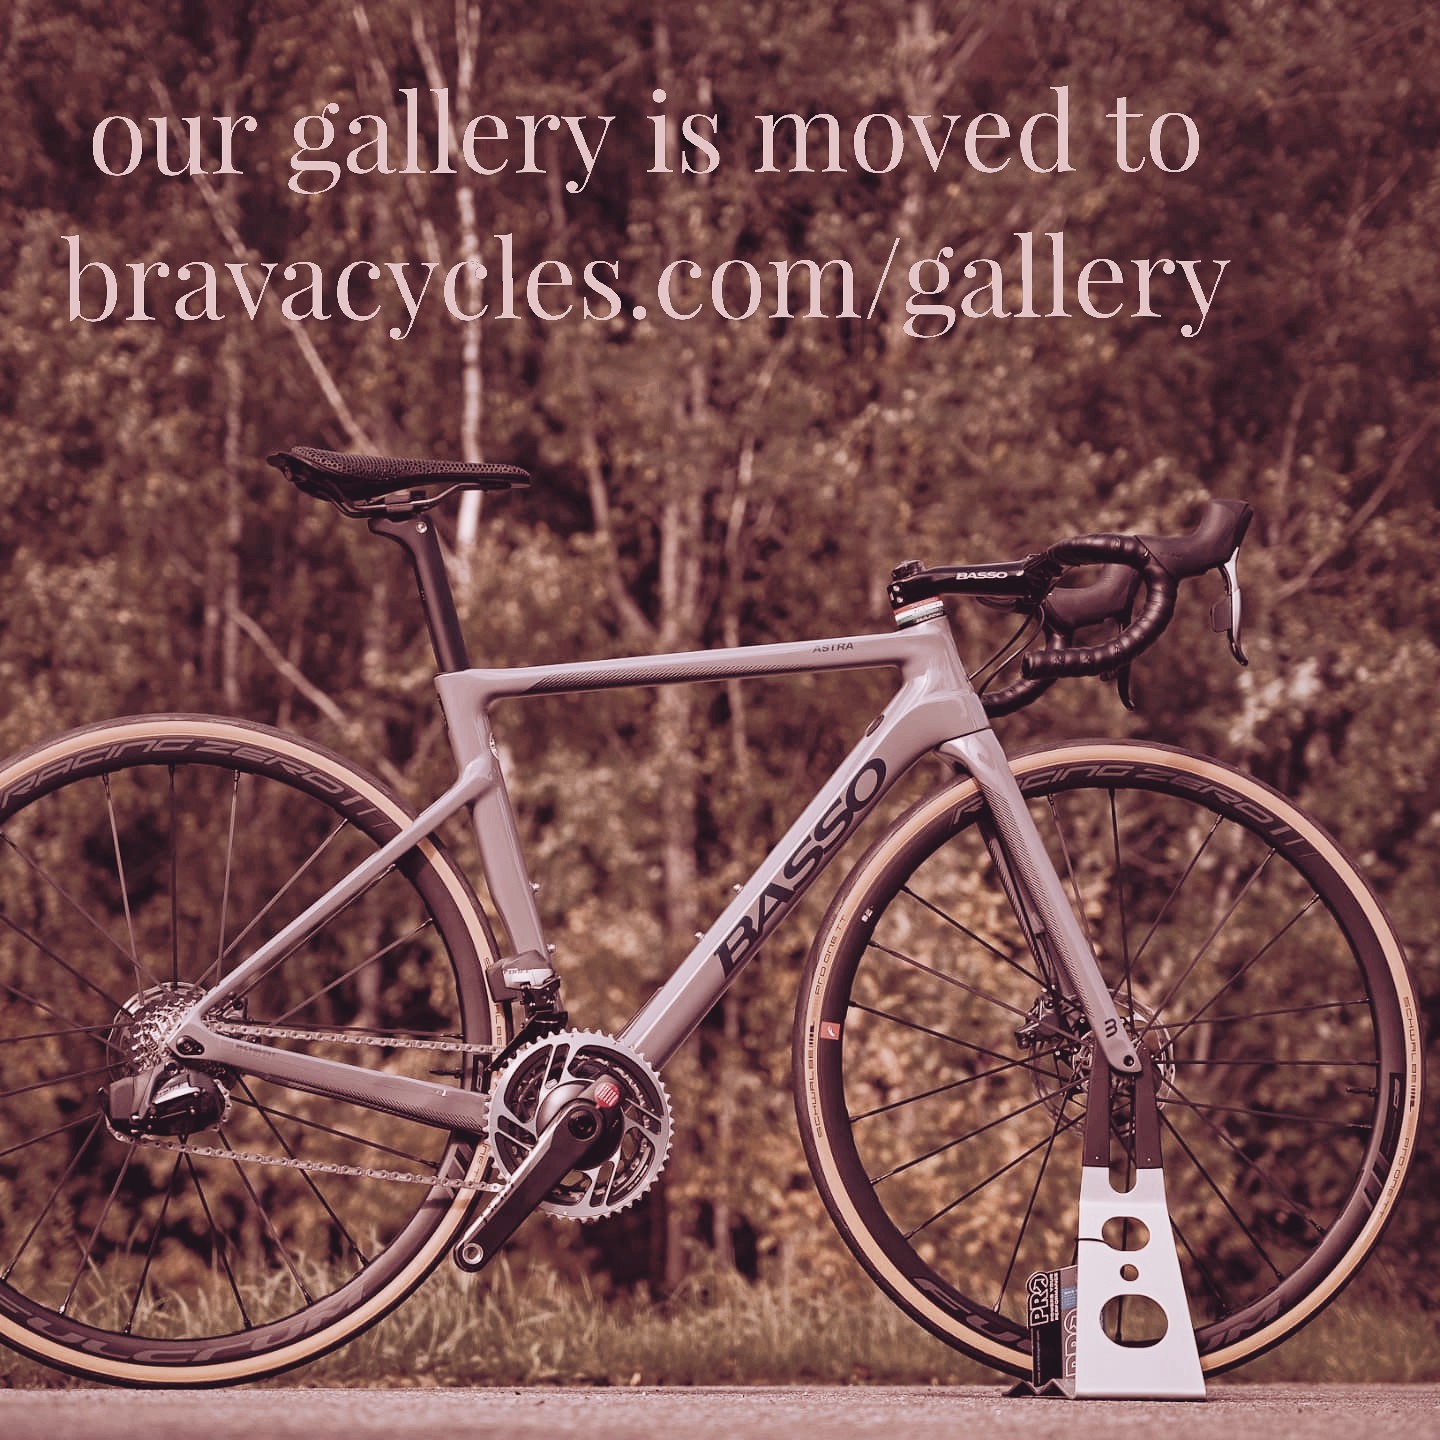 we have moved to: bravacycles.com/gallery